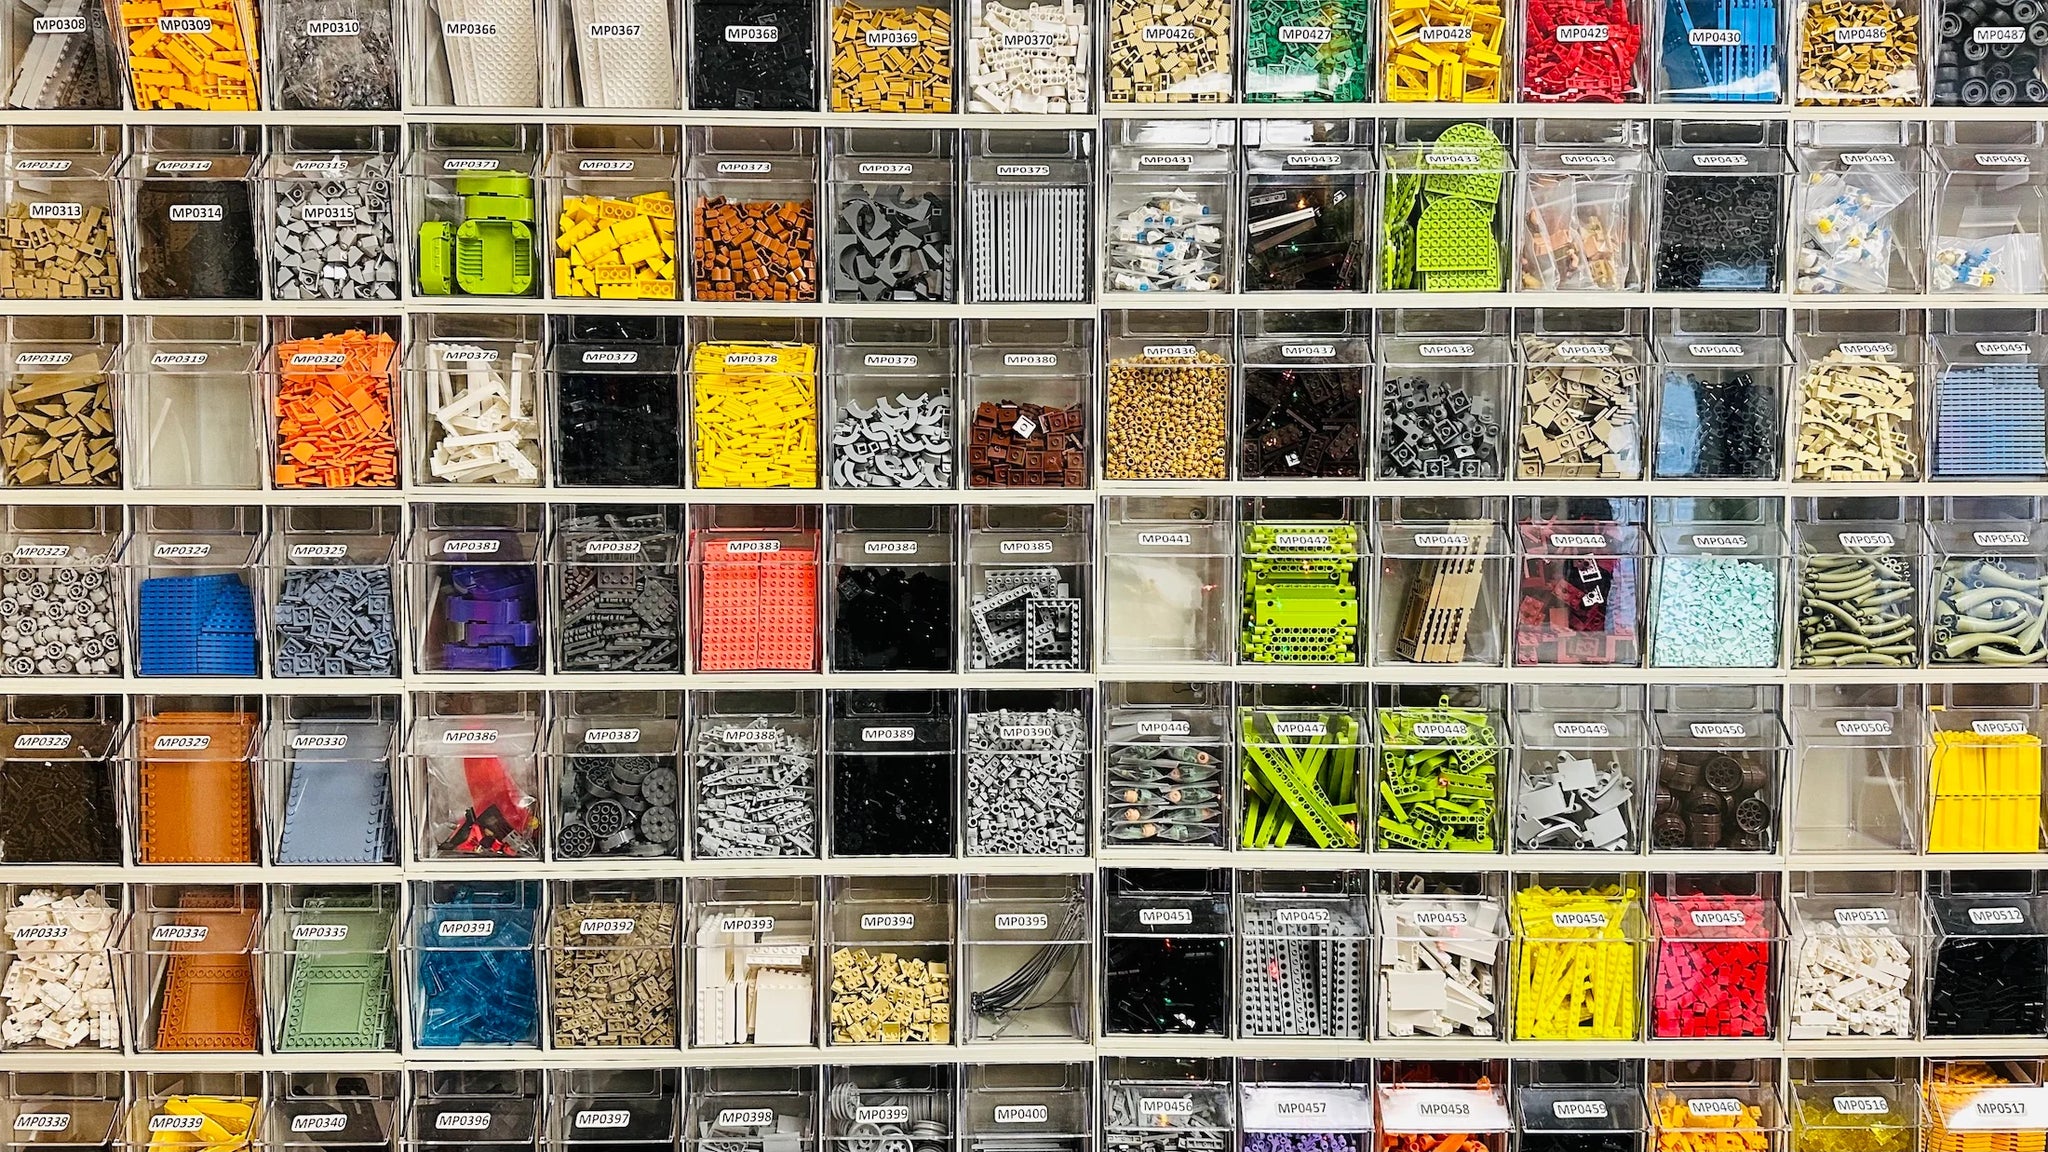 an assortment of lego bricks of all colors and sizes organized neatly into bins